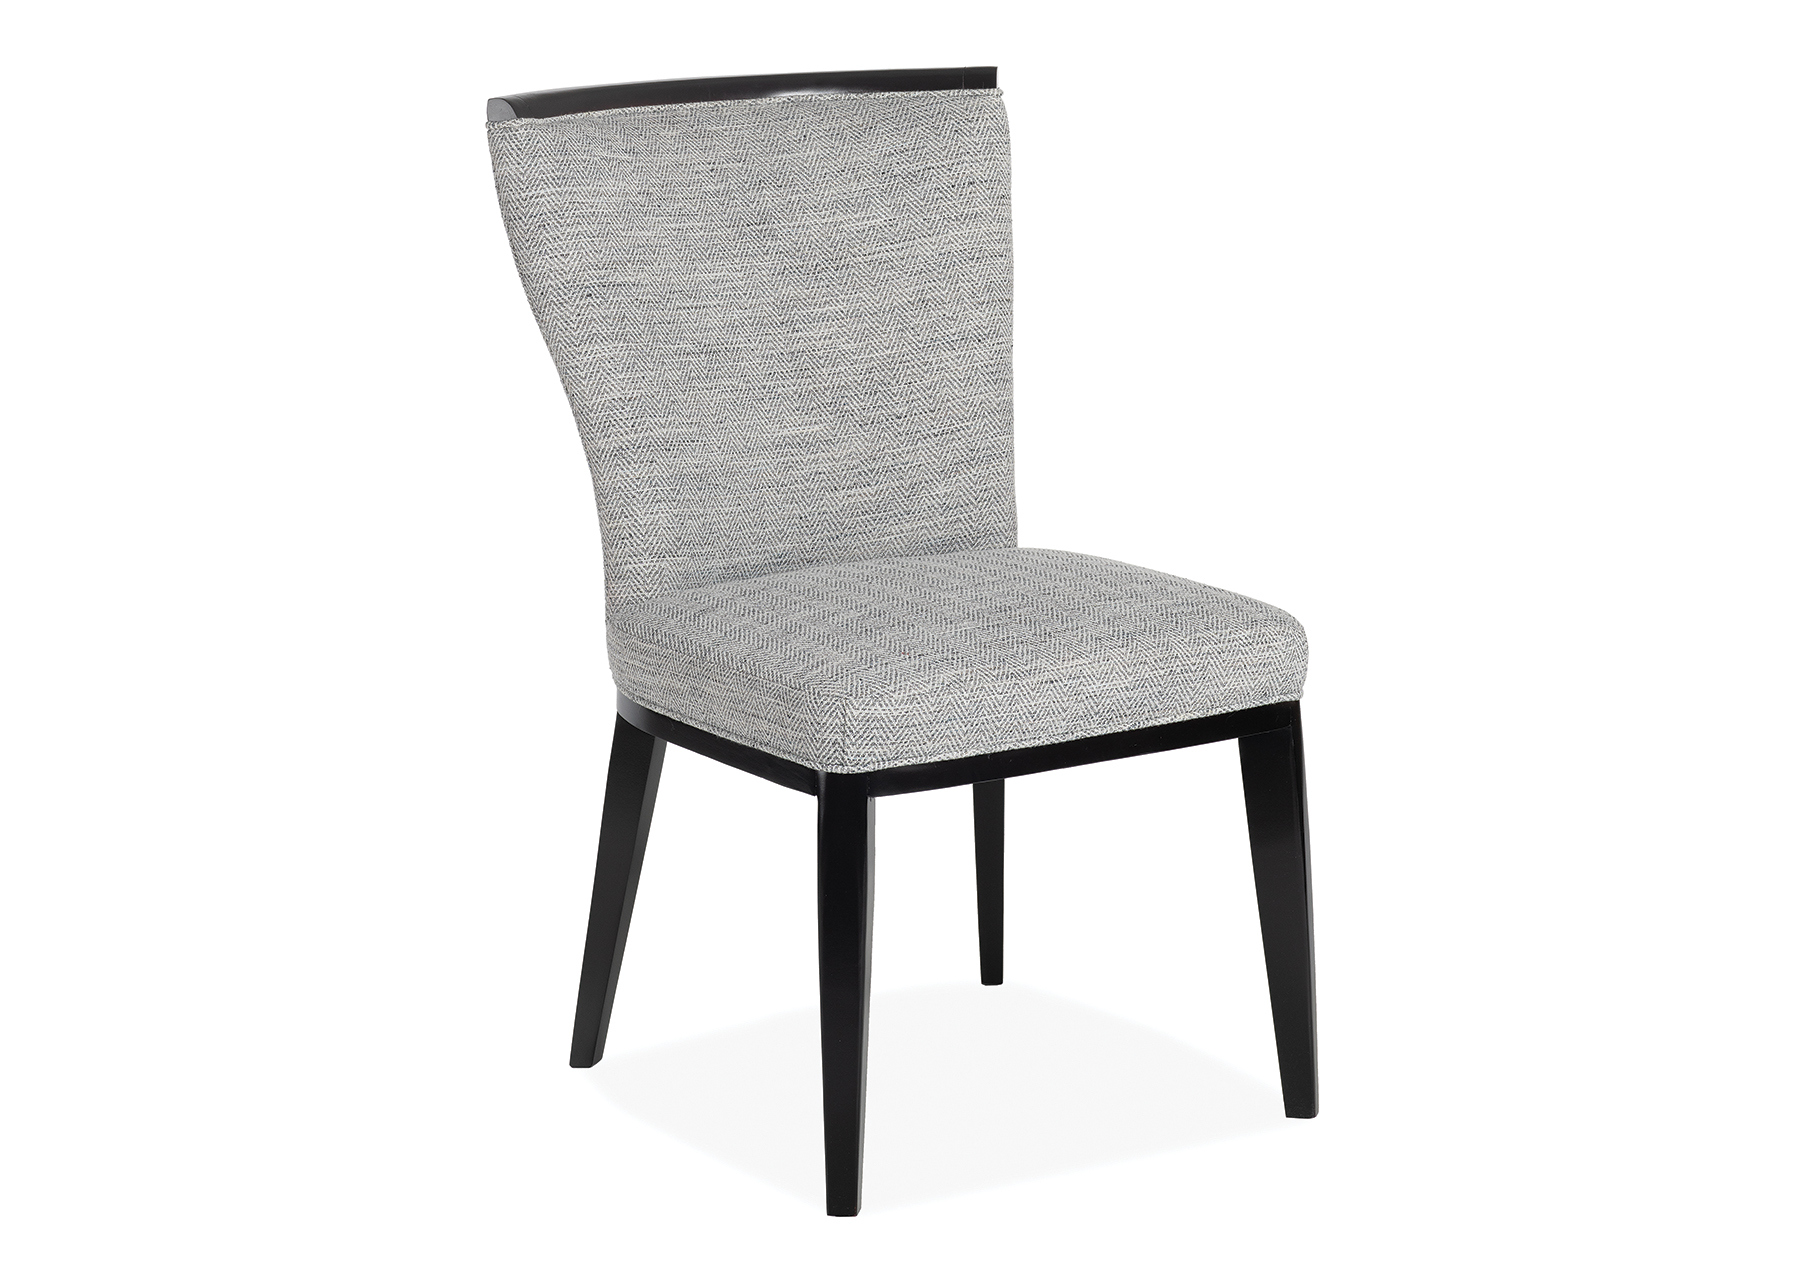 Jessica Charles 1145 Brinley Side Dining Chair